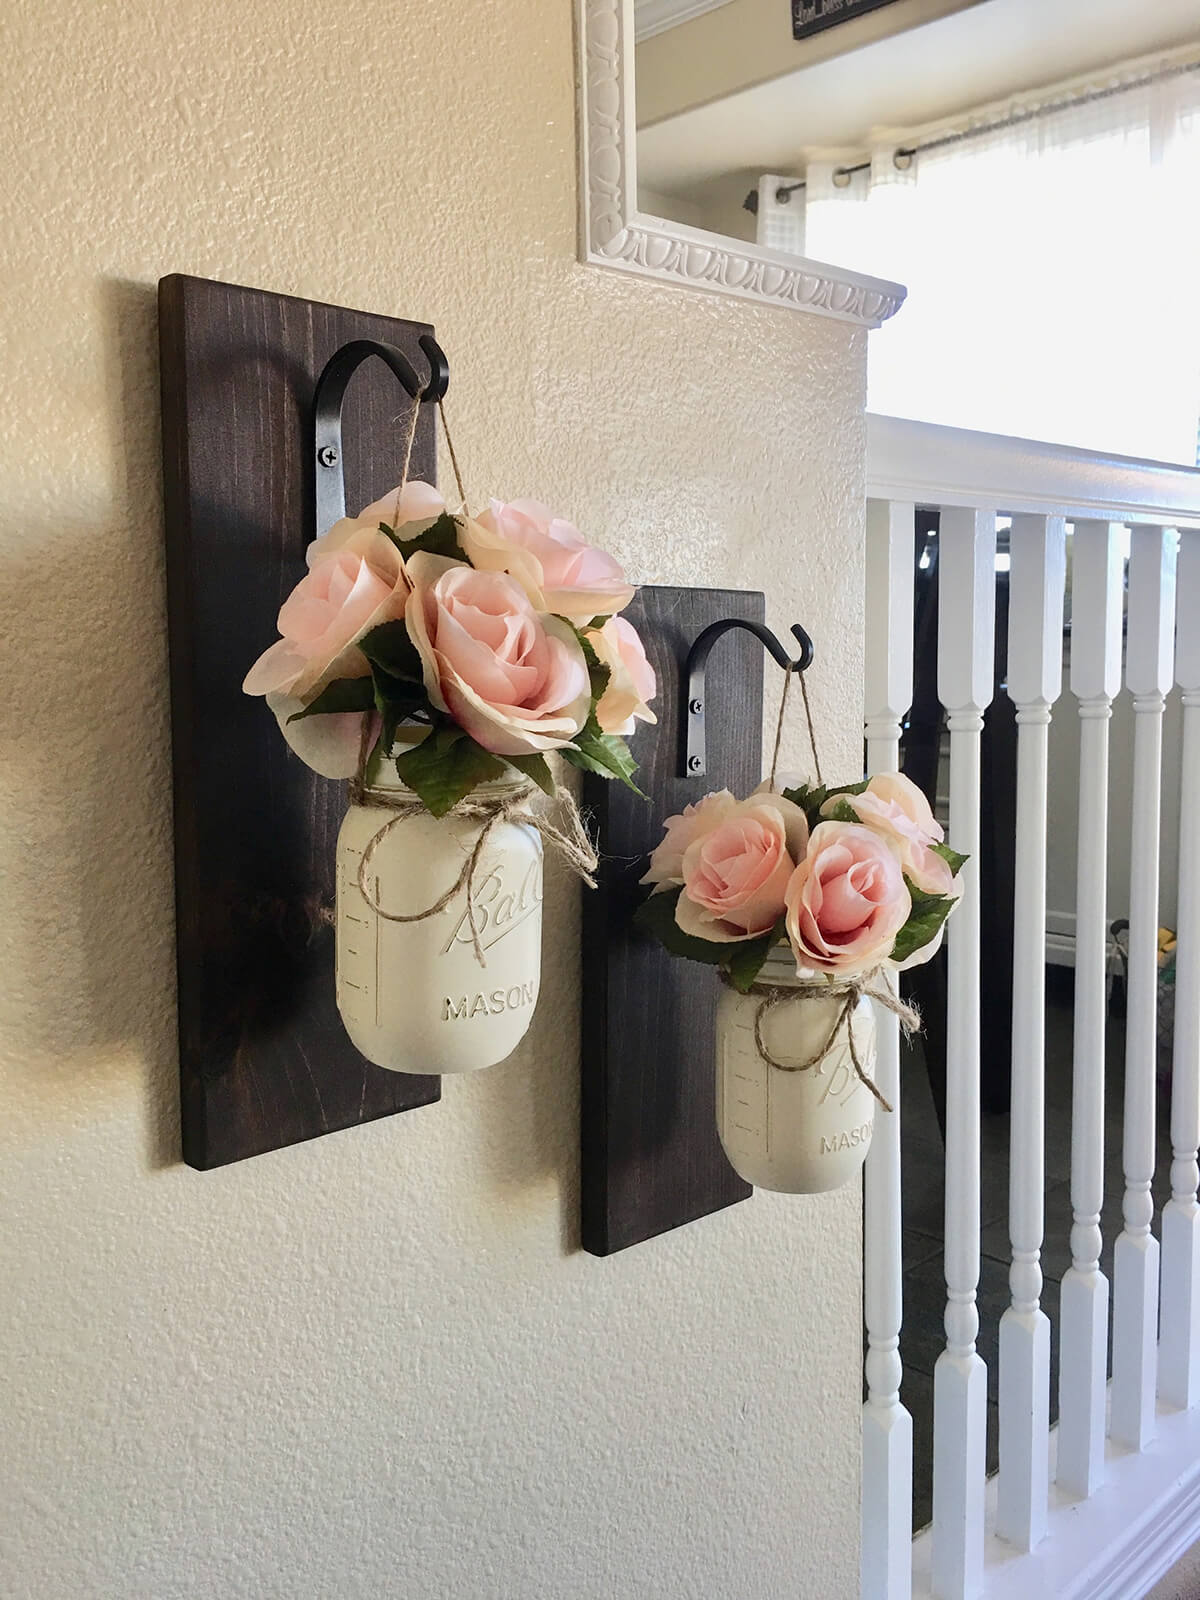 A Cute Way to Display a Rose